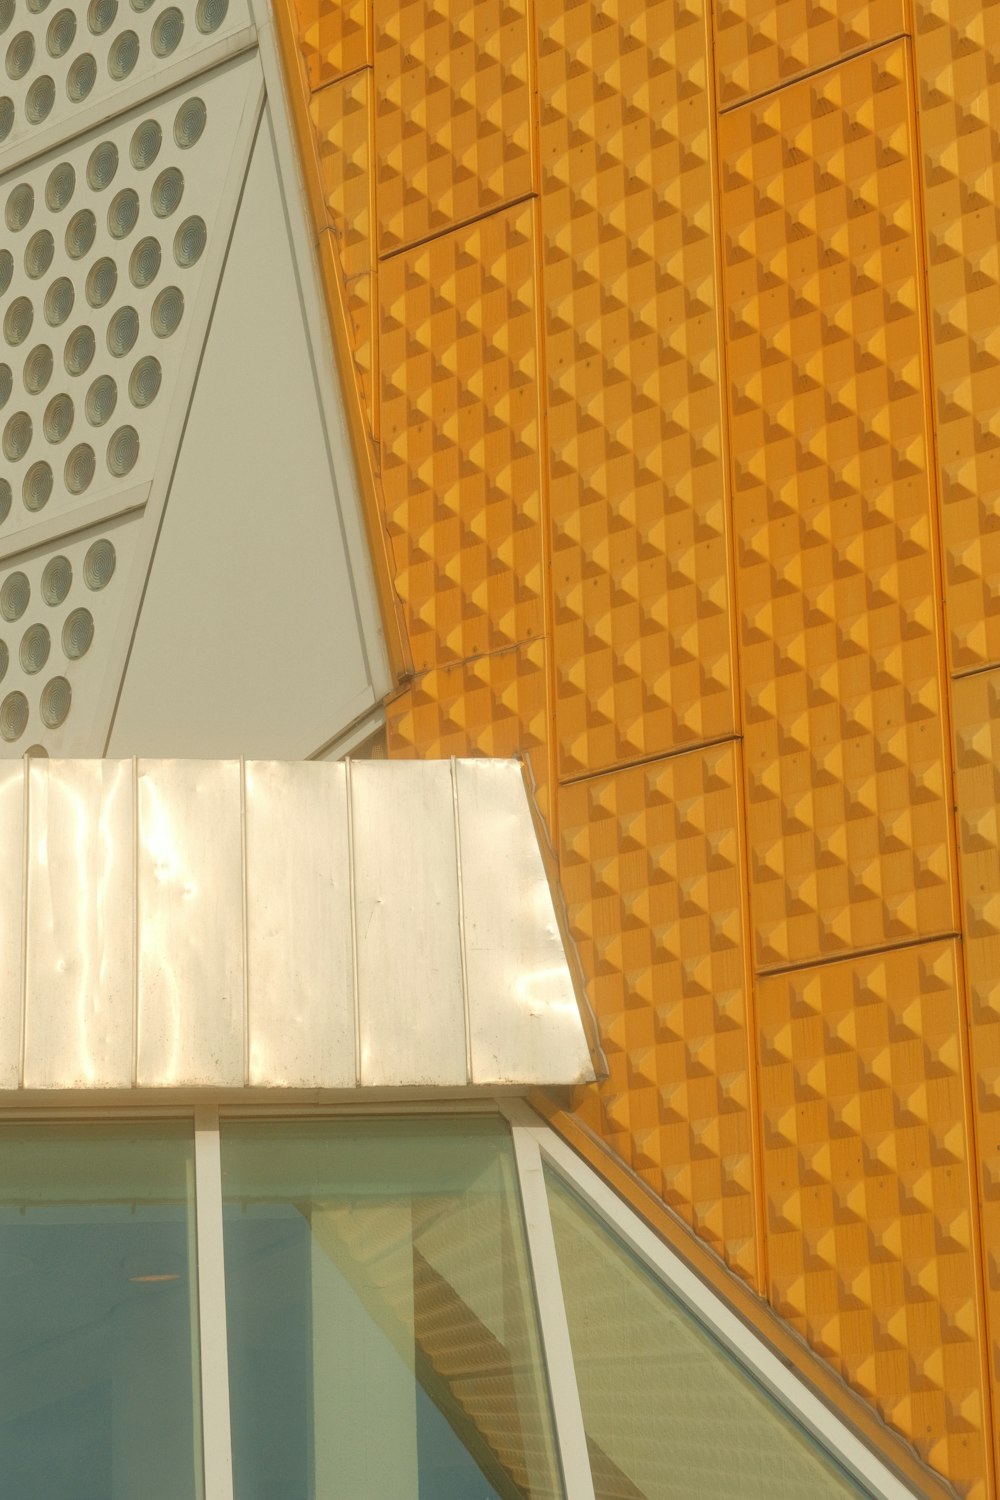 a close up of the corner of a building